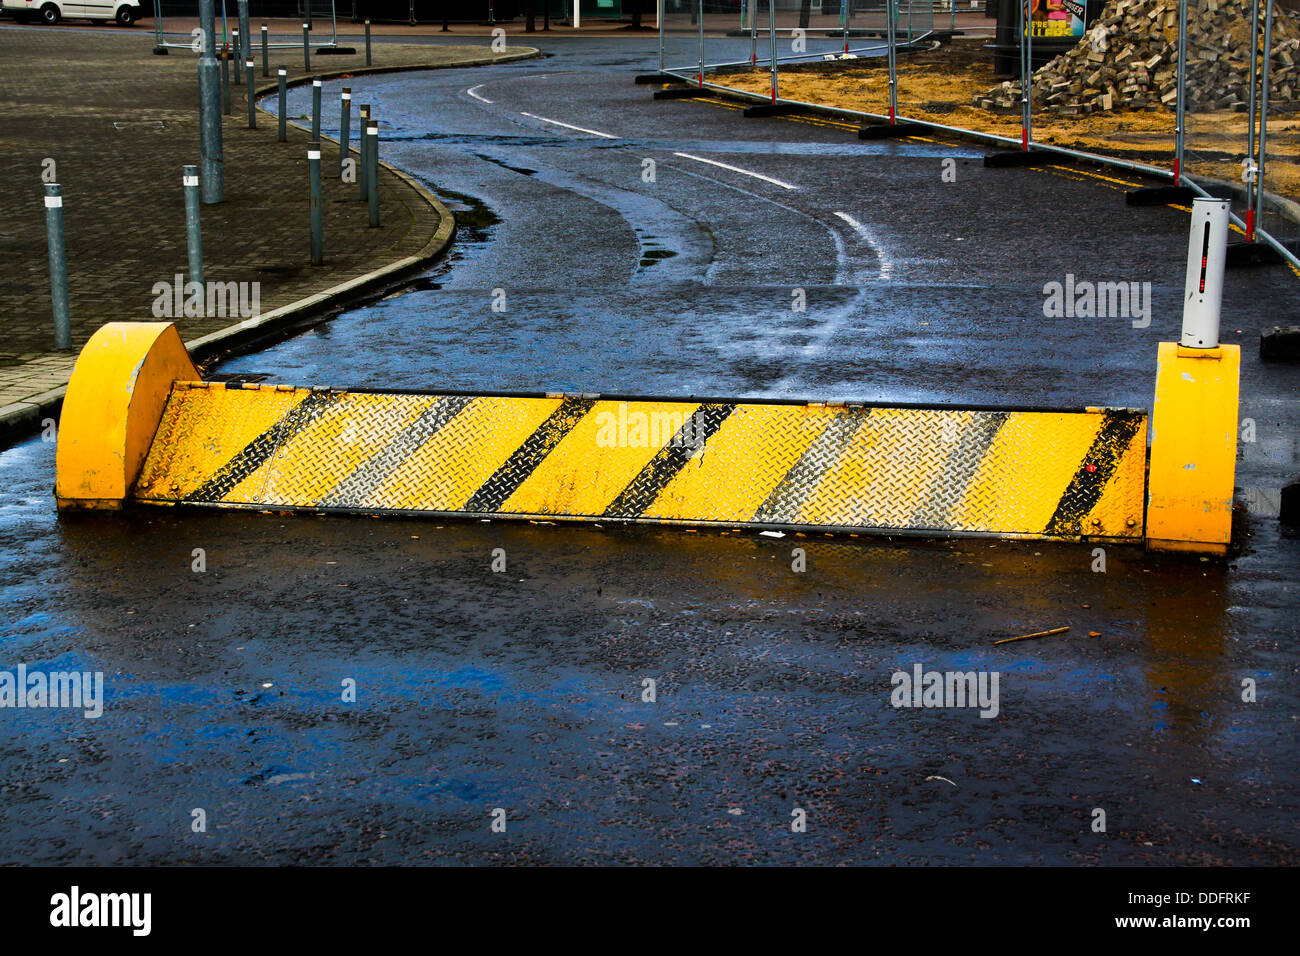 Raised security barrier across access road Stock Photo